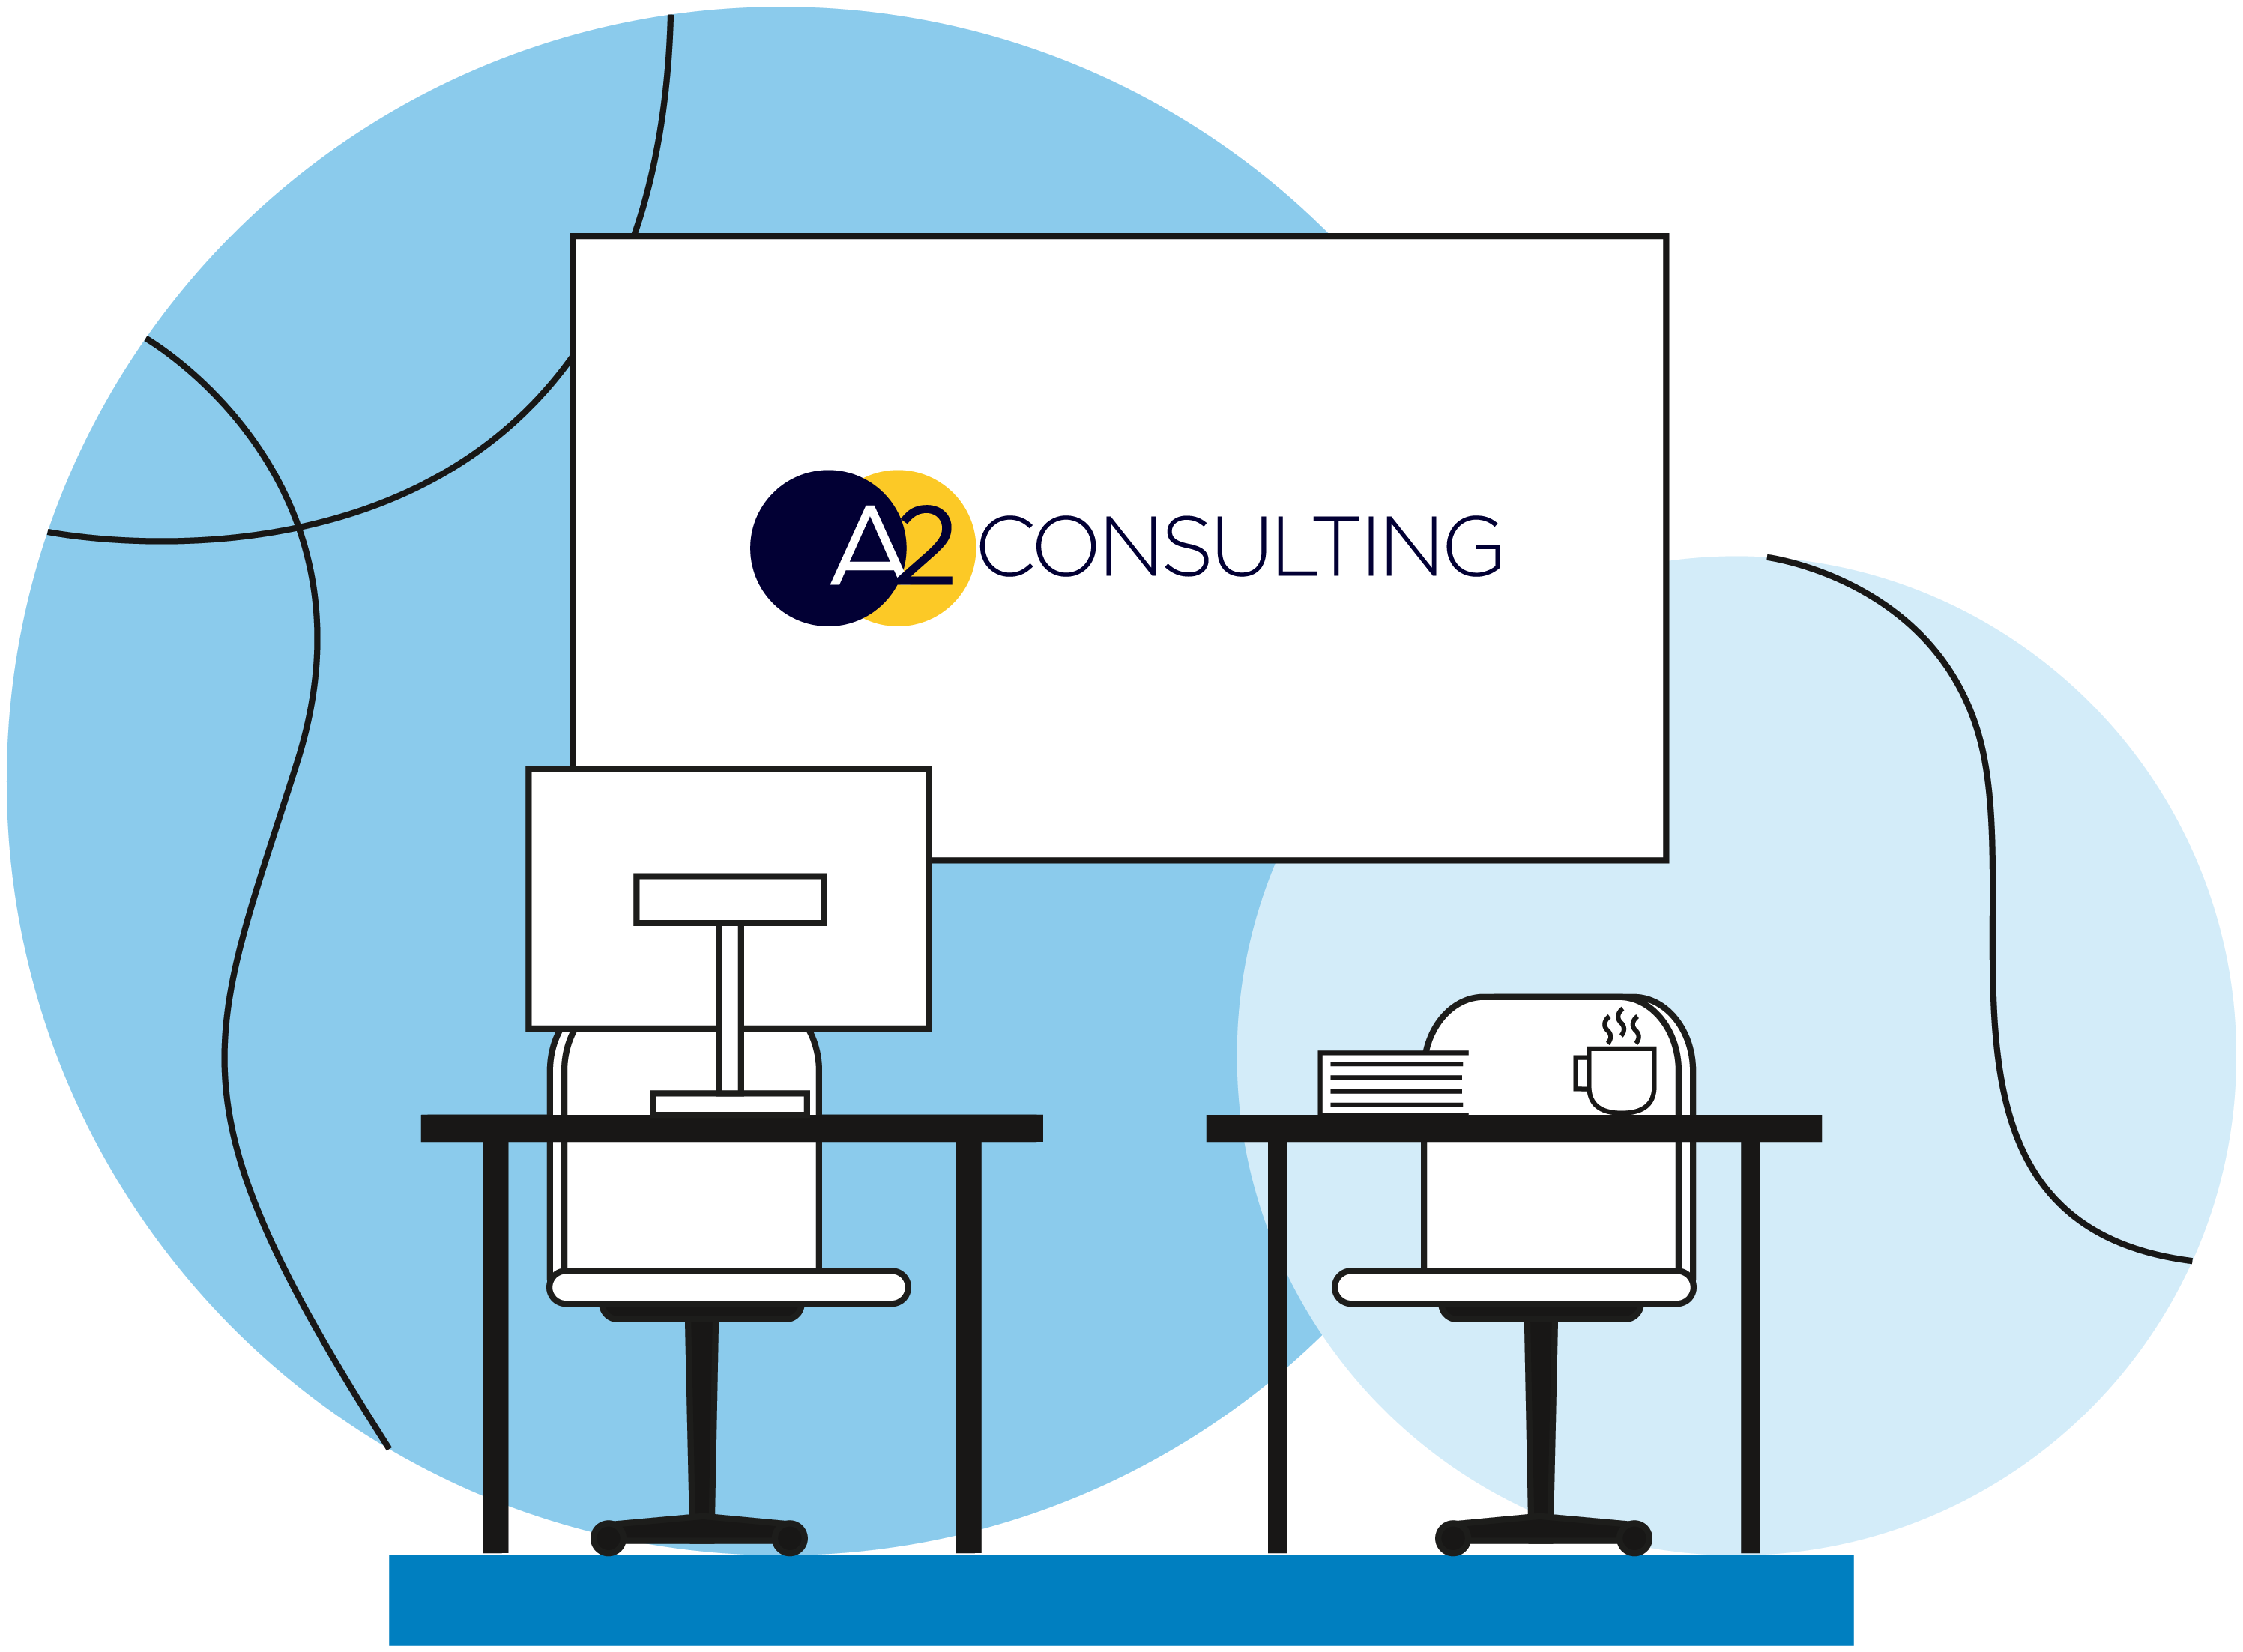 Le-groupe-a2-consulting